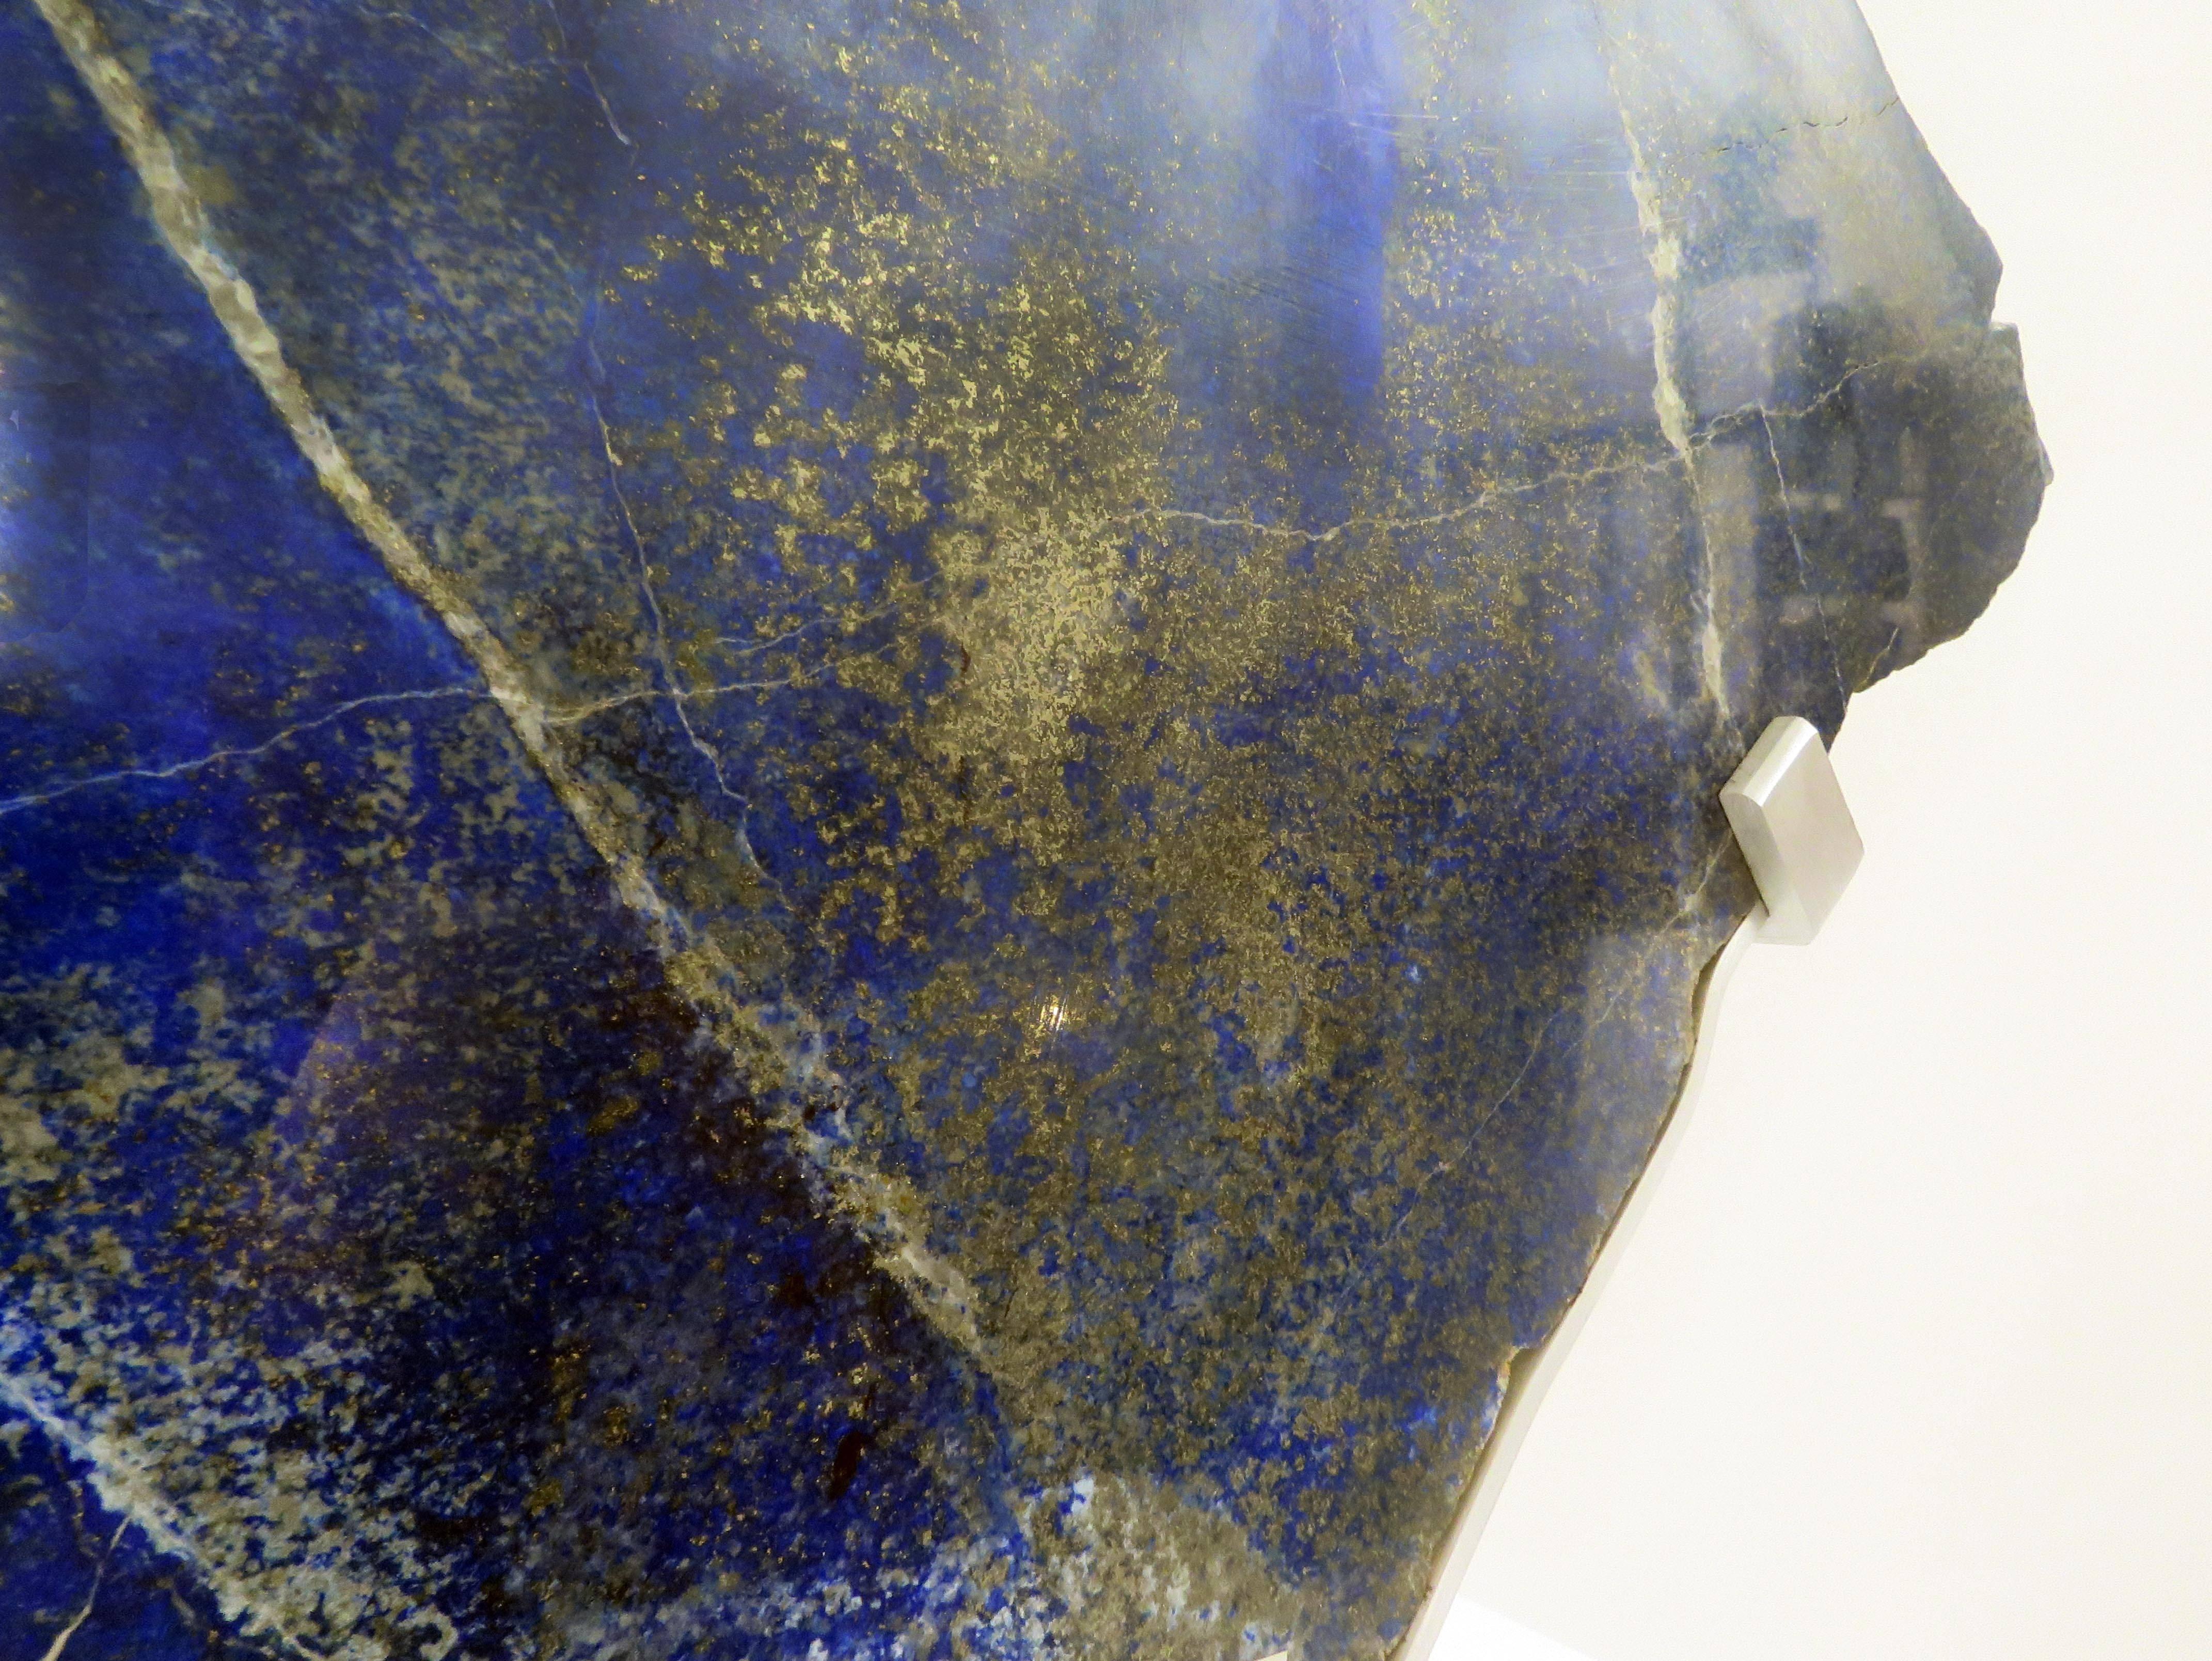 Lapis Lazuli is a deep blue metamorphic rock used as a semi-precious stone that has been prized since antiquity for its intense color.
It is a combination of lazurite, main constituent, white calcite and pyrite.
The lapis sculpture is 22” x 1” x